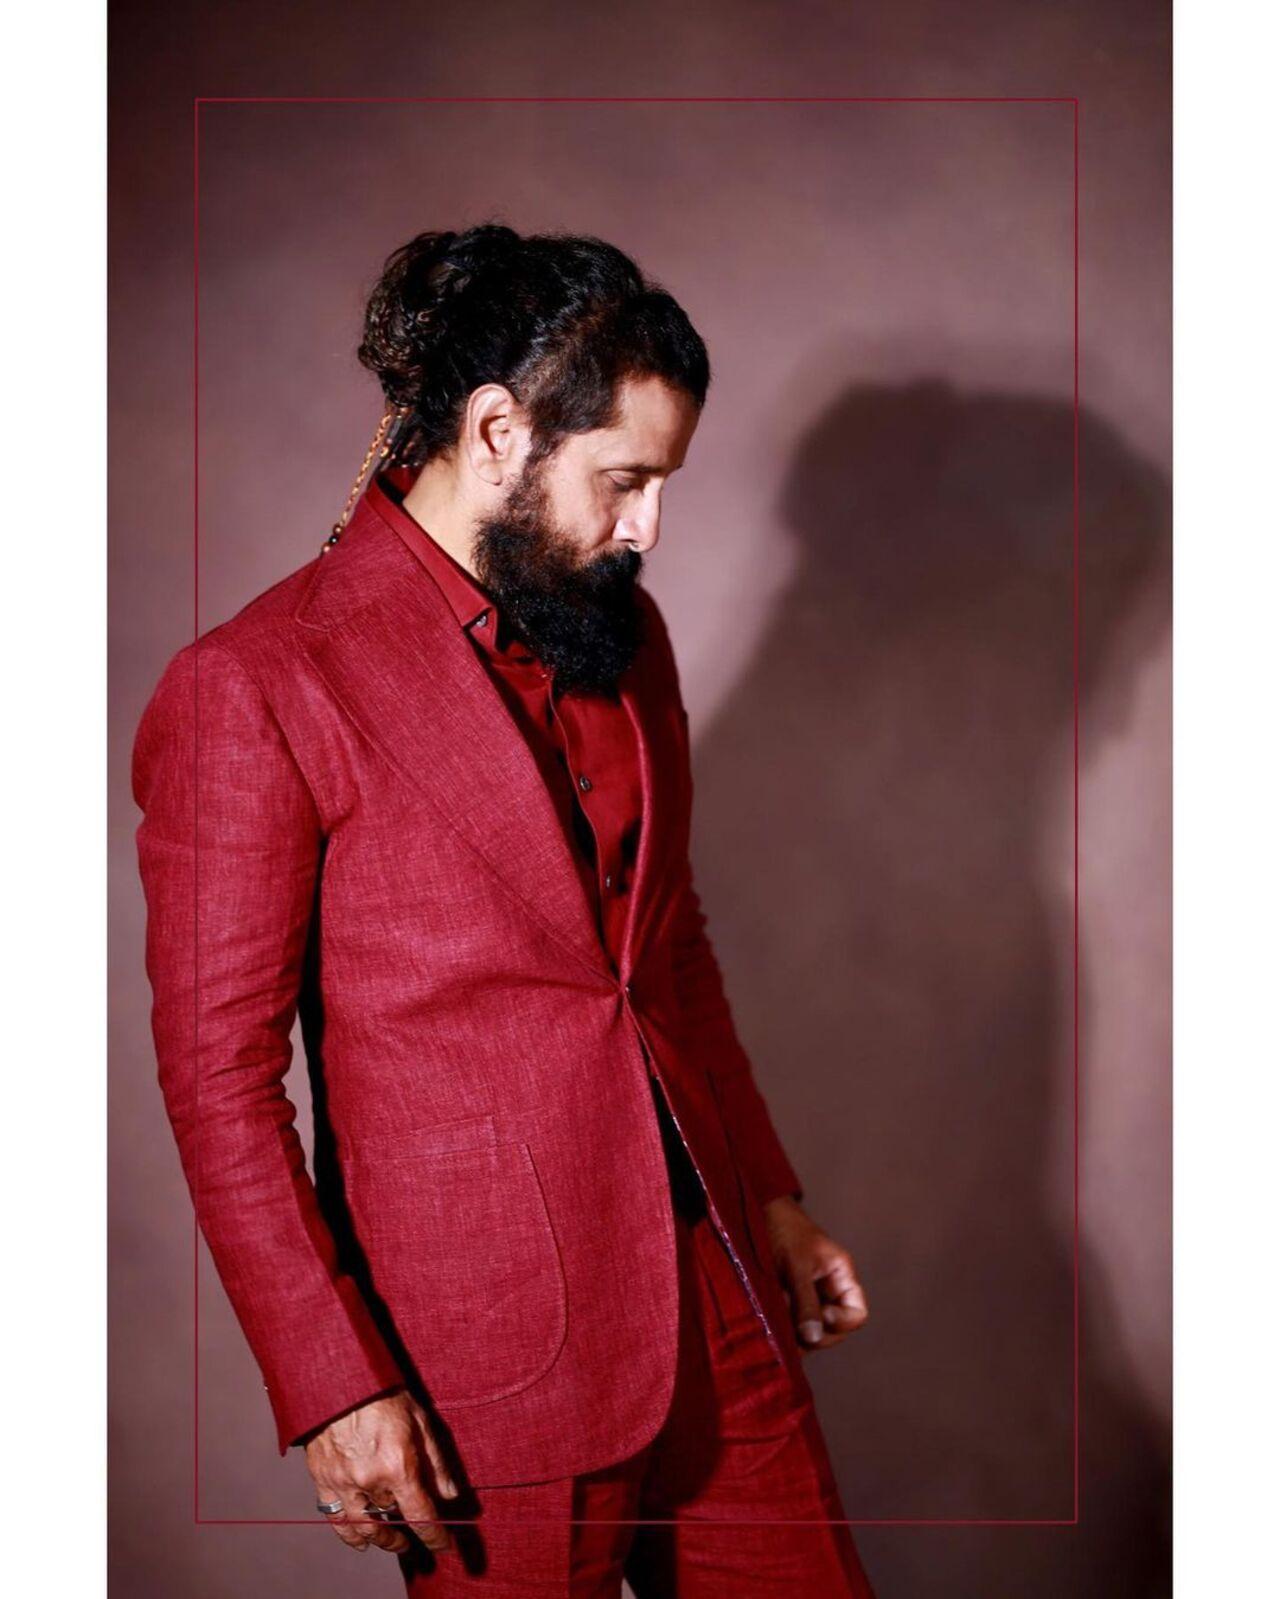 The actor rocks an all-red suit with his stylish beard and hair bun